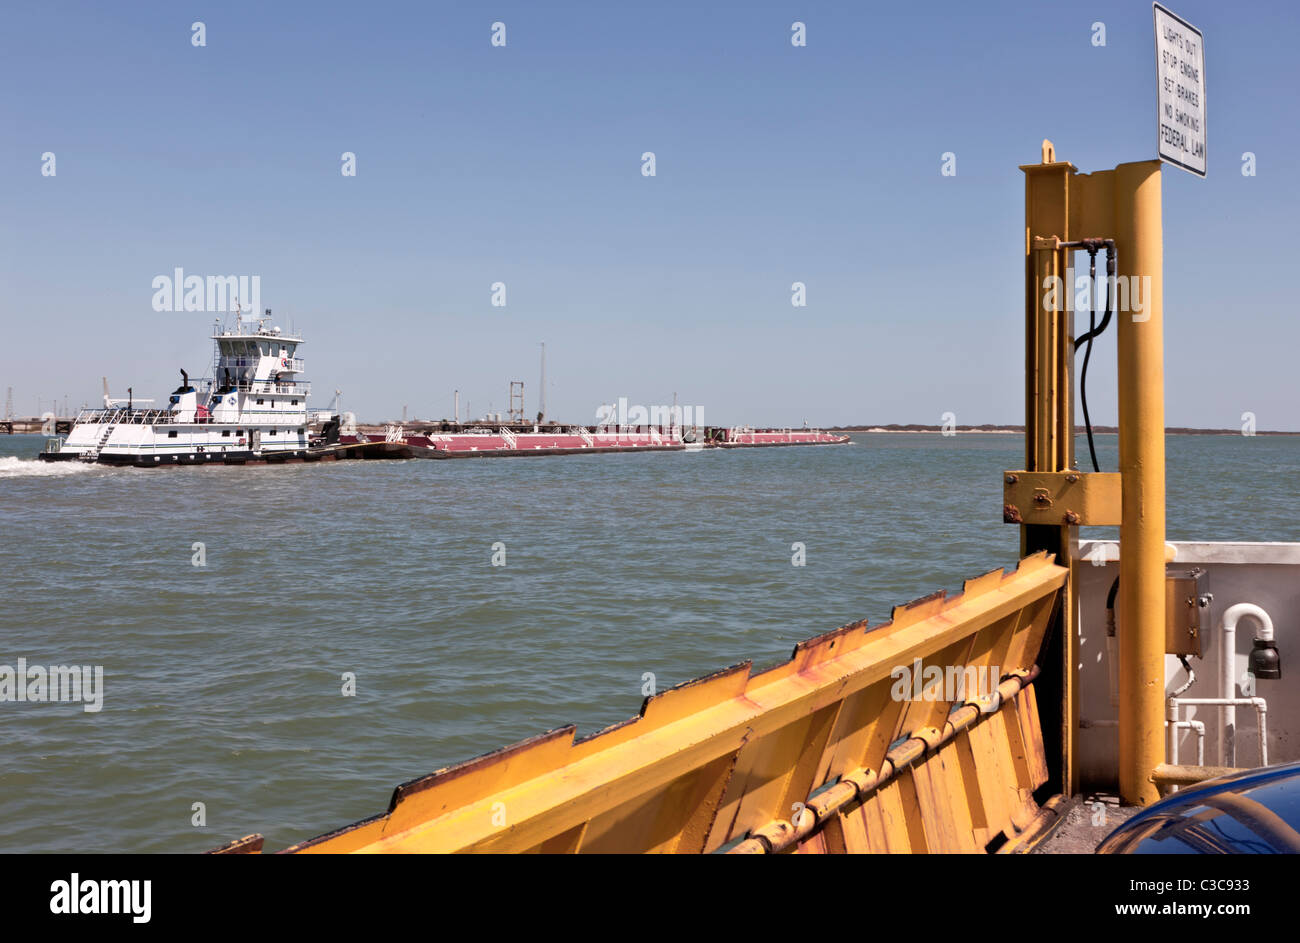 Tugboat pushing fuel barges, Corpus Ship Christi Ship channel, Stock Photo